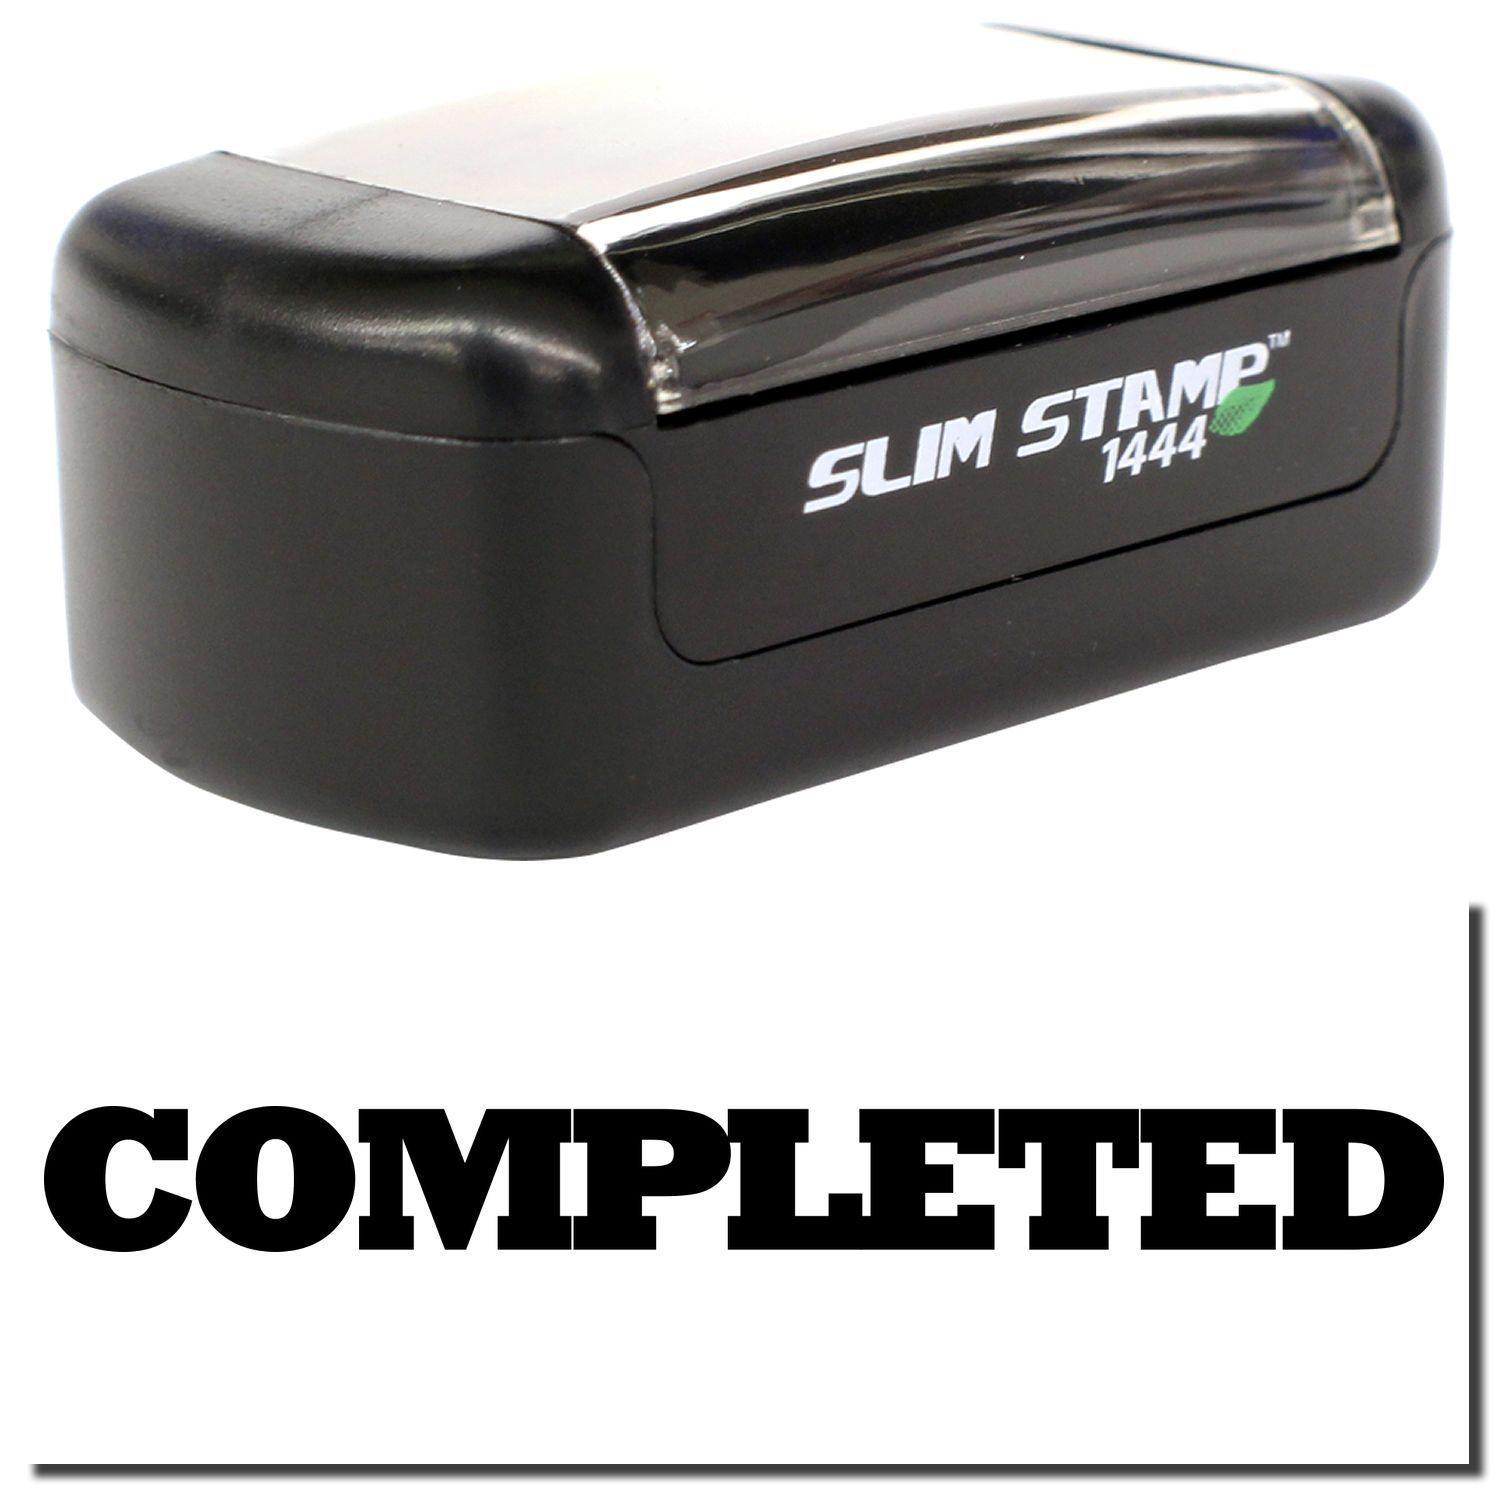 A stock office pre-inked stamp with a stamped image showing how the text "COMPLETED" in bold font is displayed after stamping.